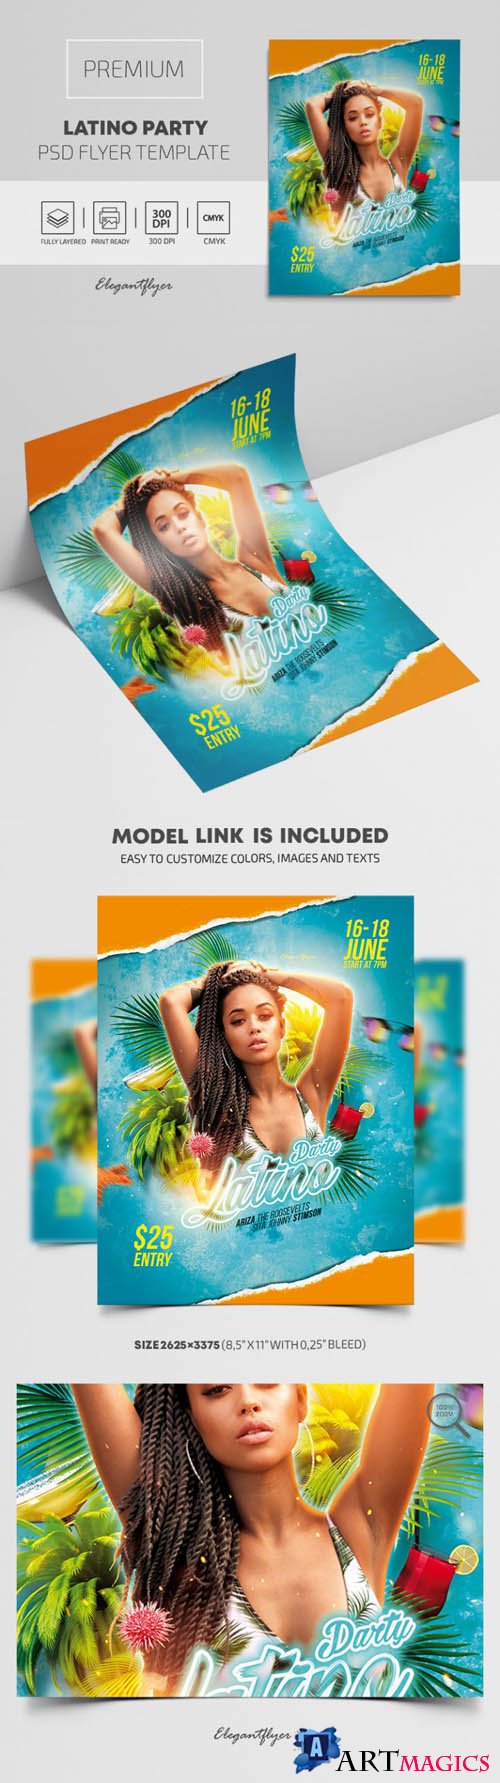 Latino Party Premium PSD Flyer Template